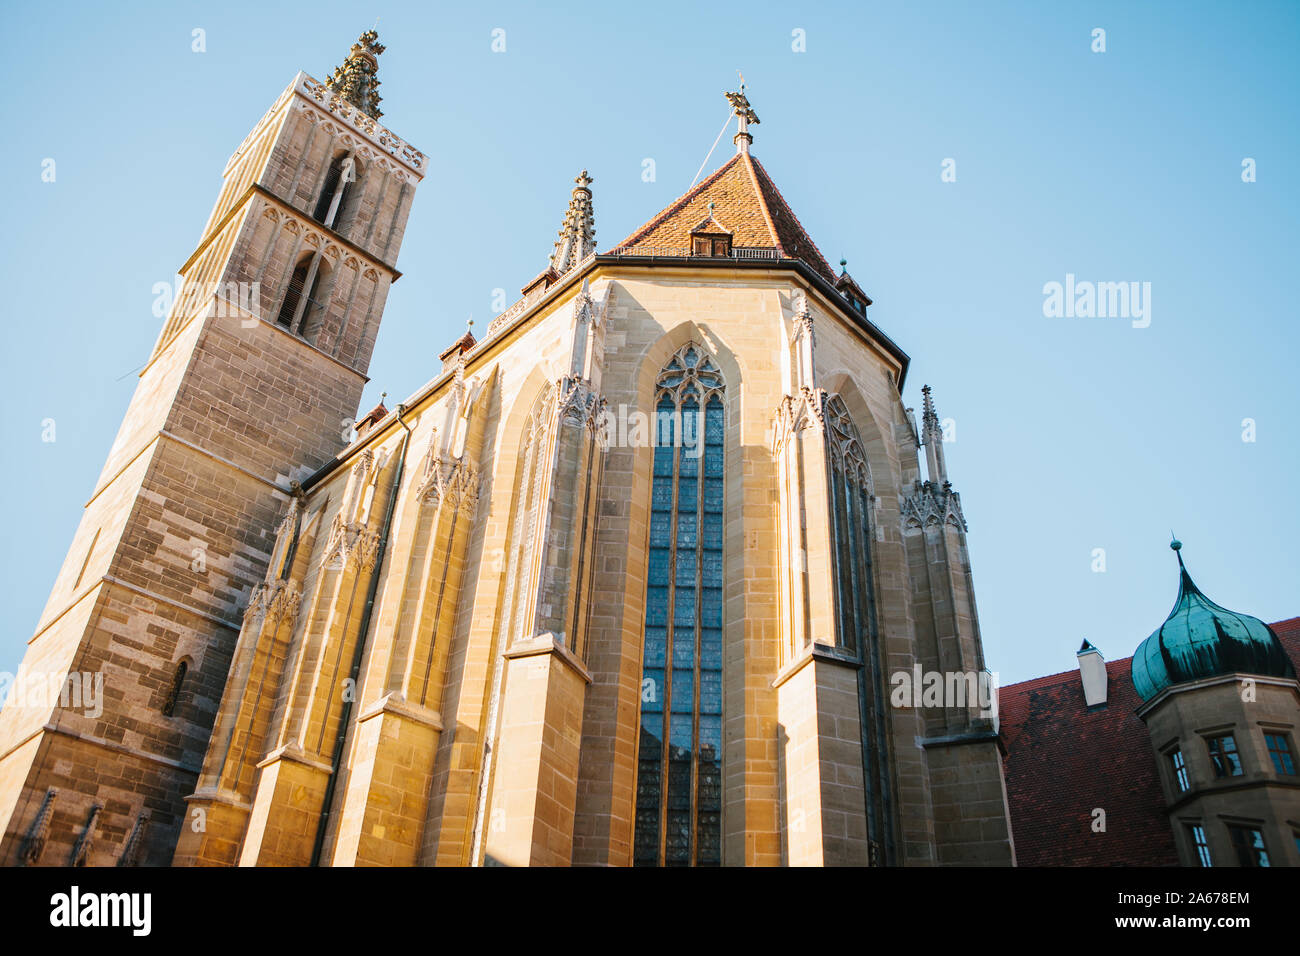 St. Jacob's Church in Rottenbourg ob der Tauber in Germany against a blue sky. Religious place and city attraction. Stock Photo